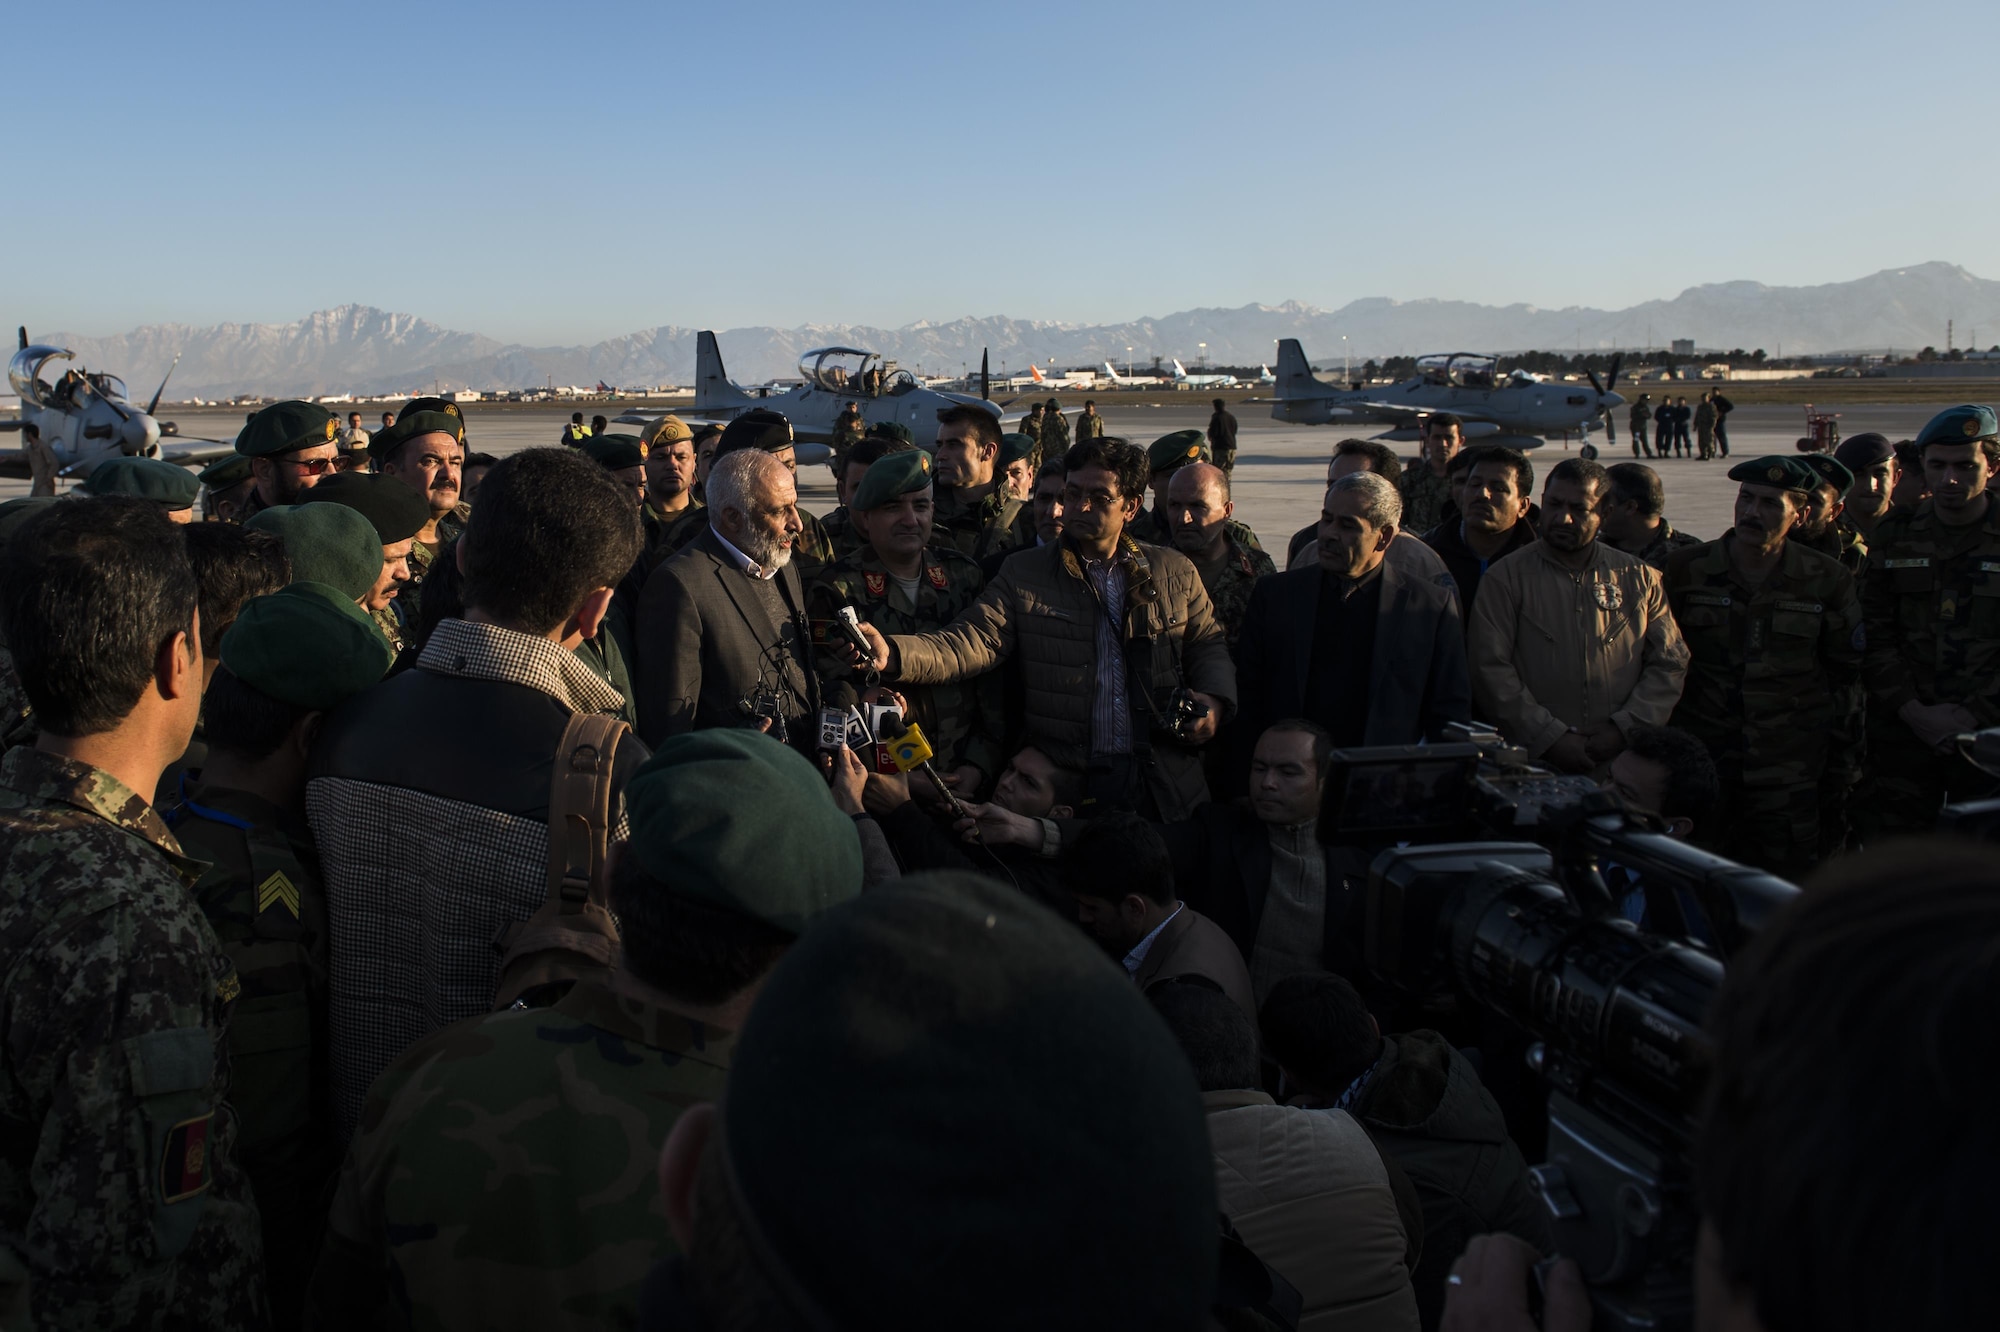 The Minister of Defense for Afghanistan, Mohammad Massom, addresses members of the Afghan air force and Afghan national media after the delivery of four A-29 Super Tucanos to the Afghan air force at Hamid Karzai International Airport, Afghanistan, Jan. 15, 2016. The A-29 Super Tucano is a 'light air support' aircraft capable of conducting close air support, aerial escort, armed overwatch and aerial interdiction. Designed to operate in high temperature and in extremely rugged terrain, the A-29 Super Tucano is highly maneuverable 4th generation weapons system capable of delivering precision guided munitions. It can fly at low speeds and low altitudes, is easy to fly, and provides exceptionally accurate weapons delivery. It is currently in service with 10 different air forces around the world. (U.S. Air Force photo by Tech. Sgt. Nathan Lipscomb)